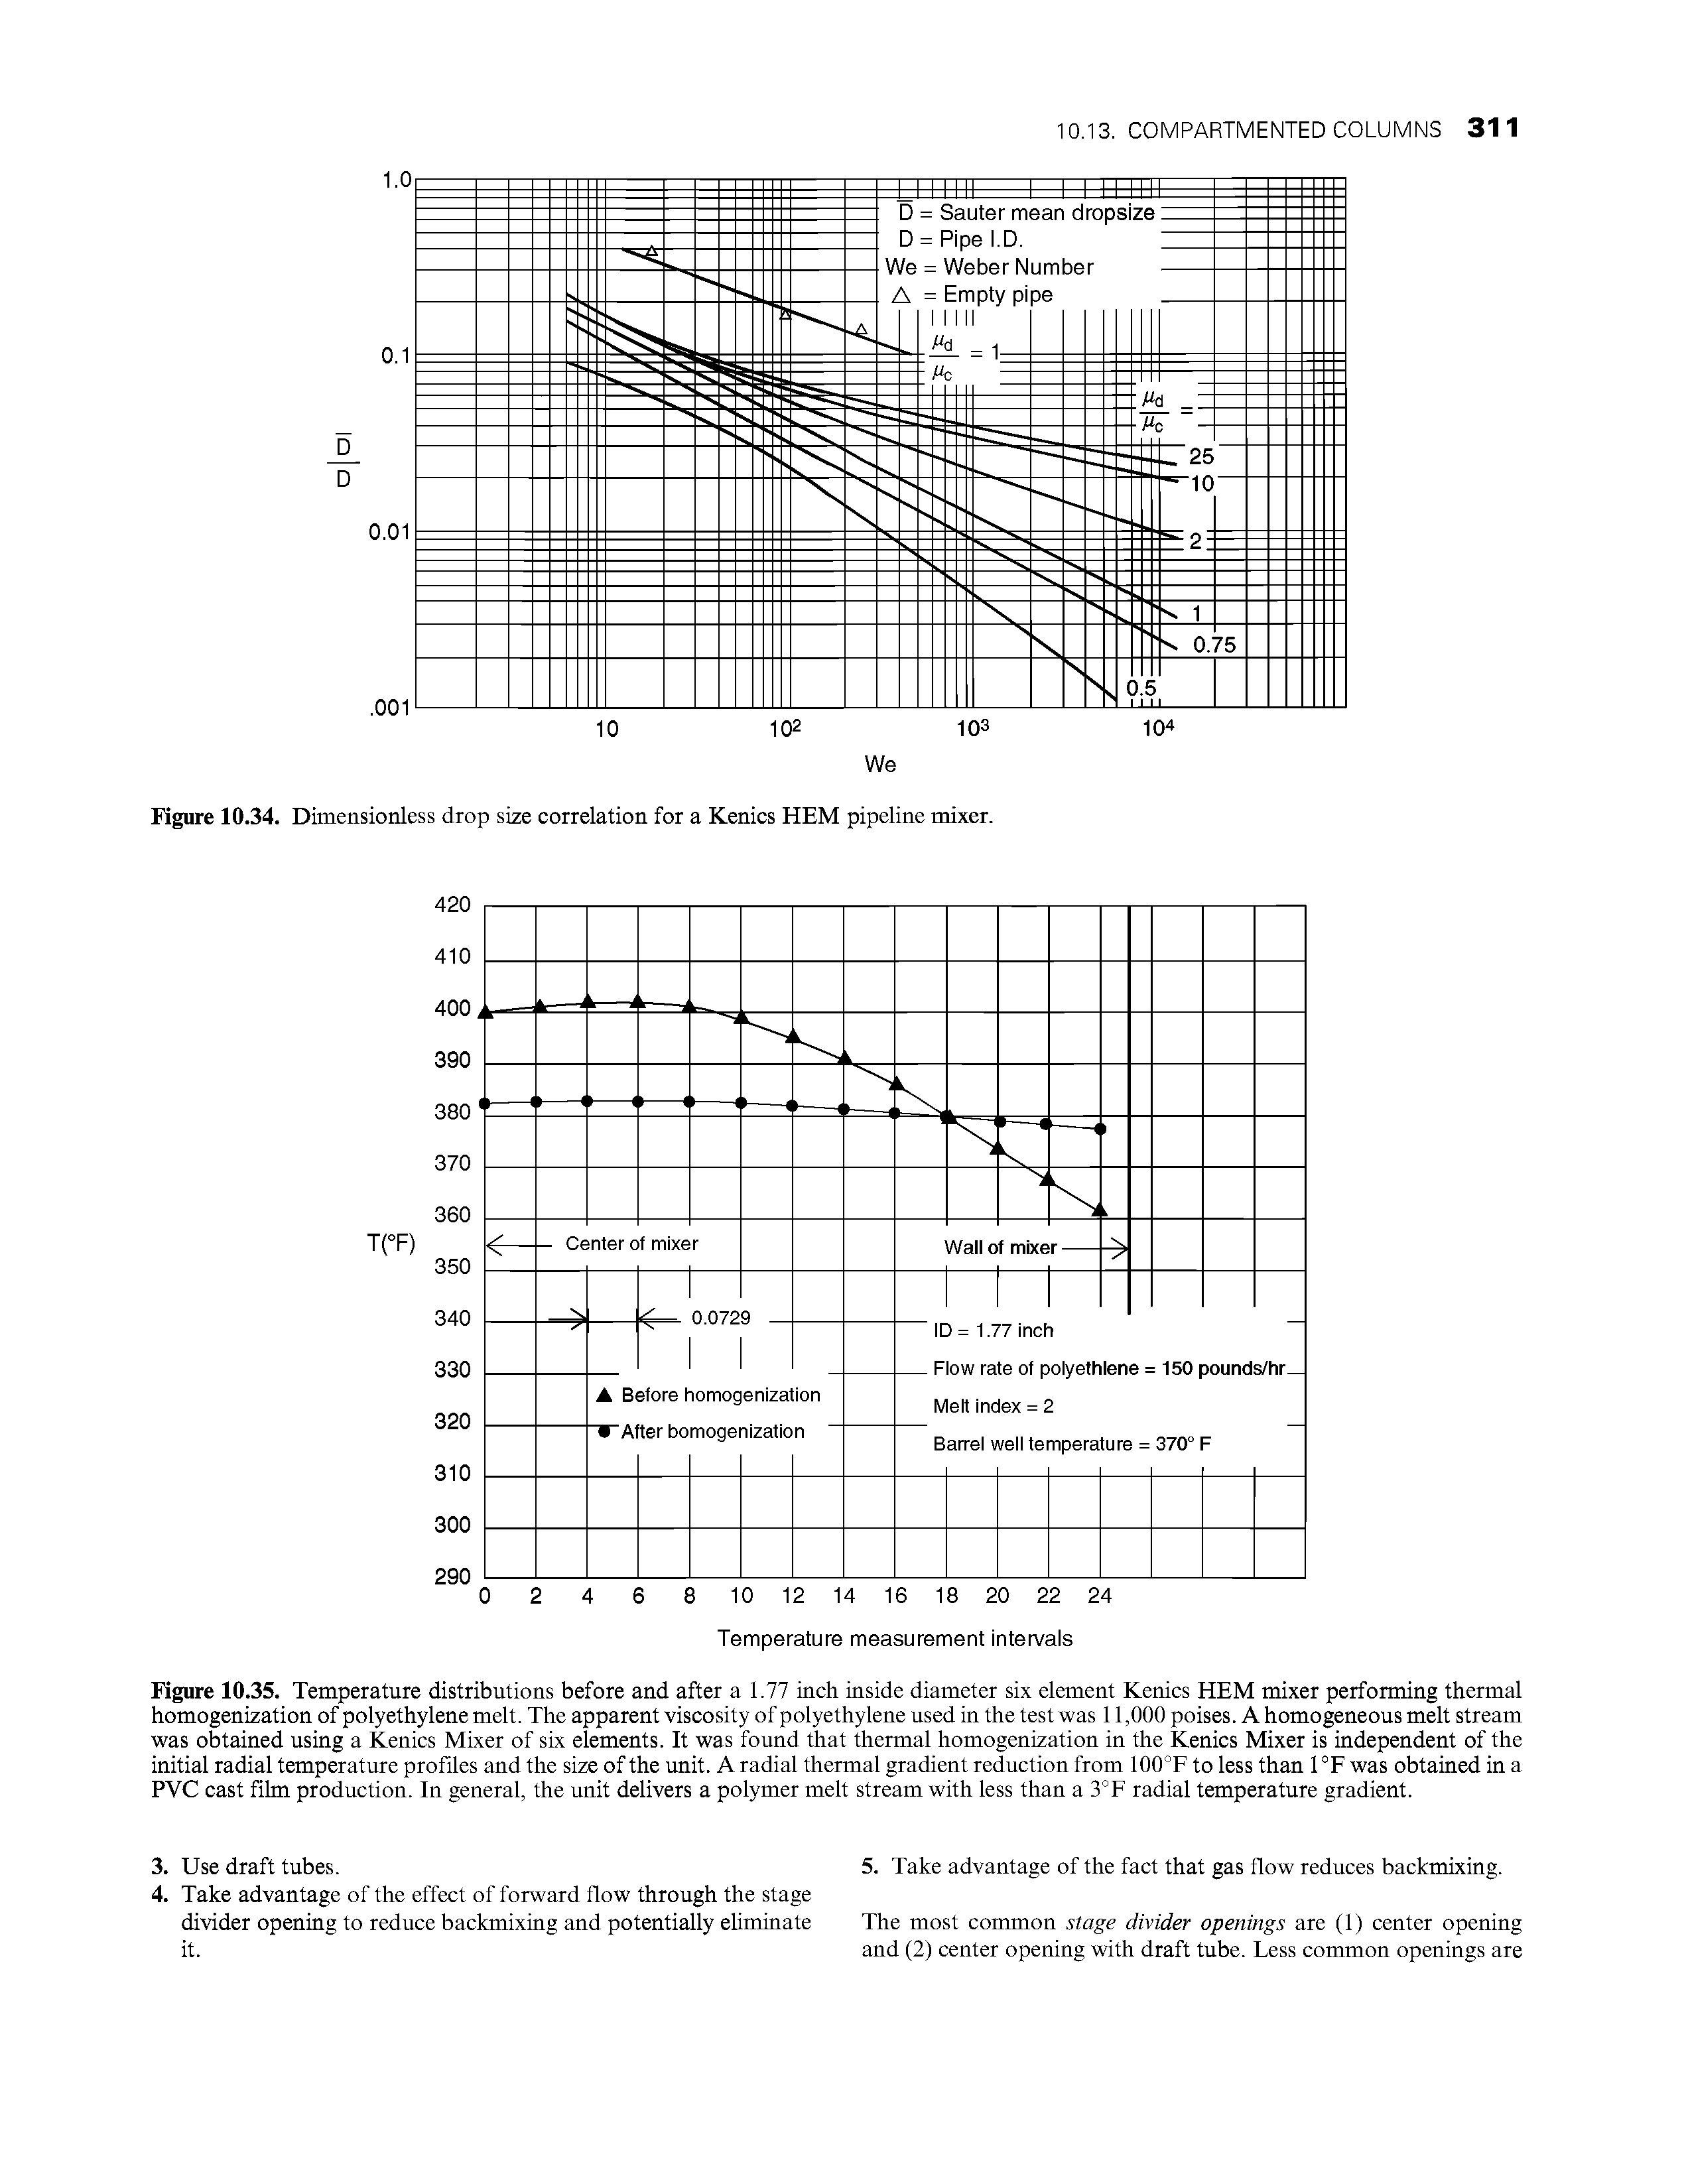 Figure 10.35. Temperature distributions before and after a 1.77 inch inside diameter six element Kenics HEM mixer performing thermal homogenization of polyethylene melt. The apparent viscosity of polyethylene used in the test was 11,000 poises. A homogeneous melt stream was obtained using a Kenics Mixer of six elements. It was found that thermal homogenization in the Kenics Mixer is independent of the initial radial temperature profiles and the size of the unit. A radial thermal gradient reduction from 100°F to less than 1 °F was obtained in a PVC cast film production. In general, the unit delivers a polymer melt stream with less than a 3°F radial temperature gradient.